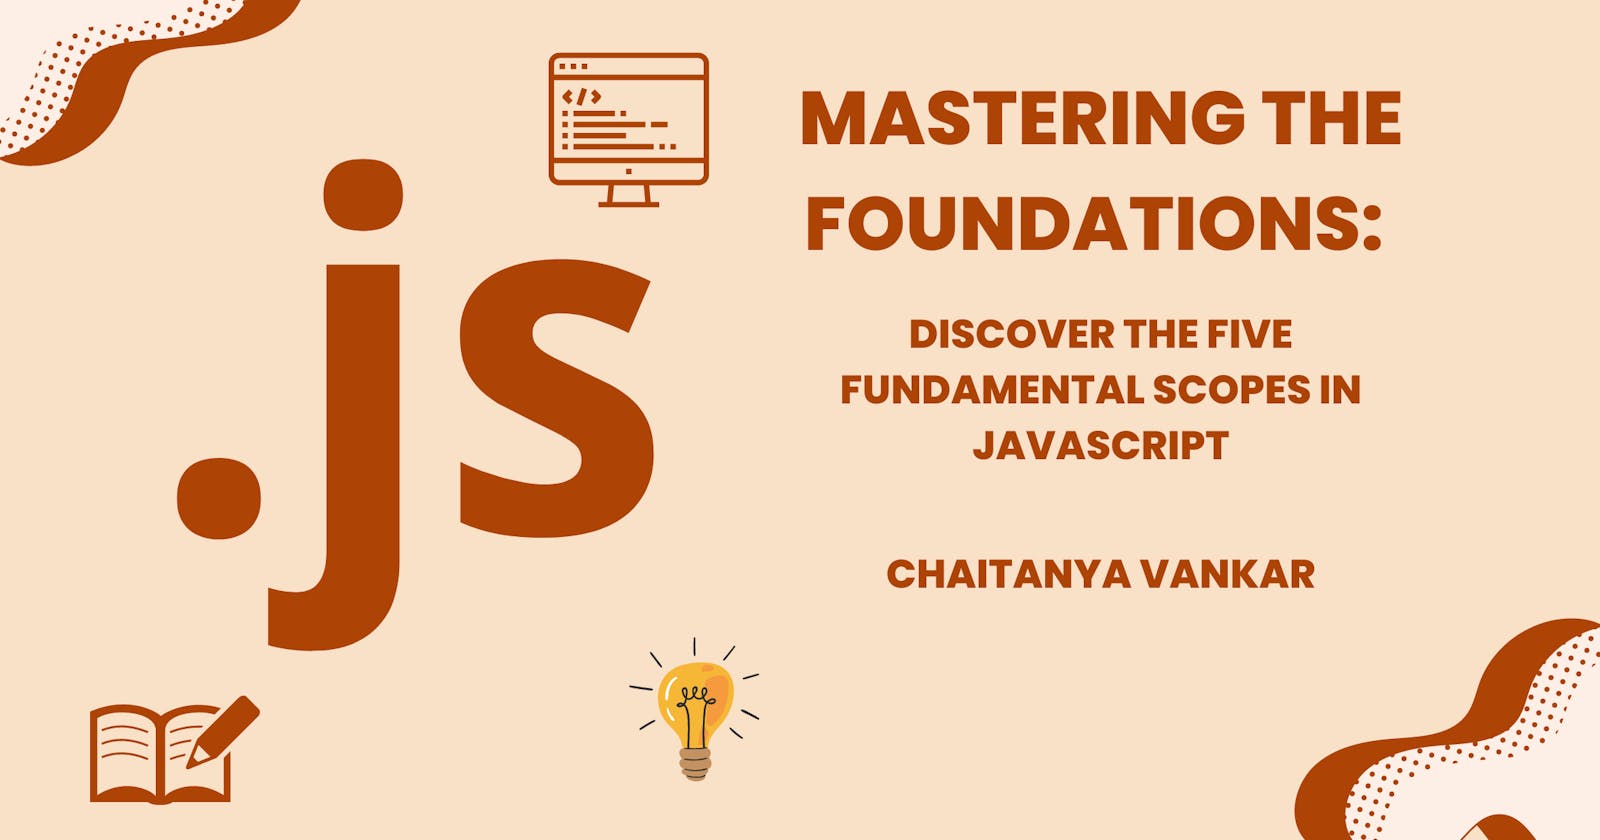 Mastering the Foundations: Discover the Five Fundamental Scopes in JavaScript